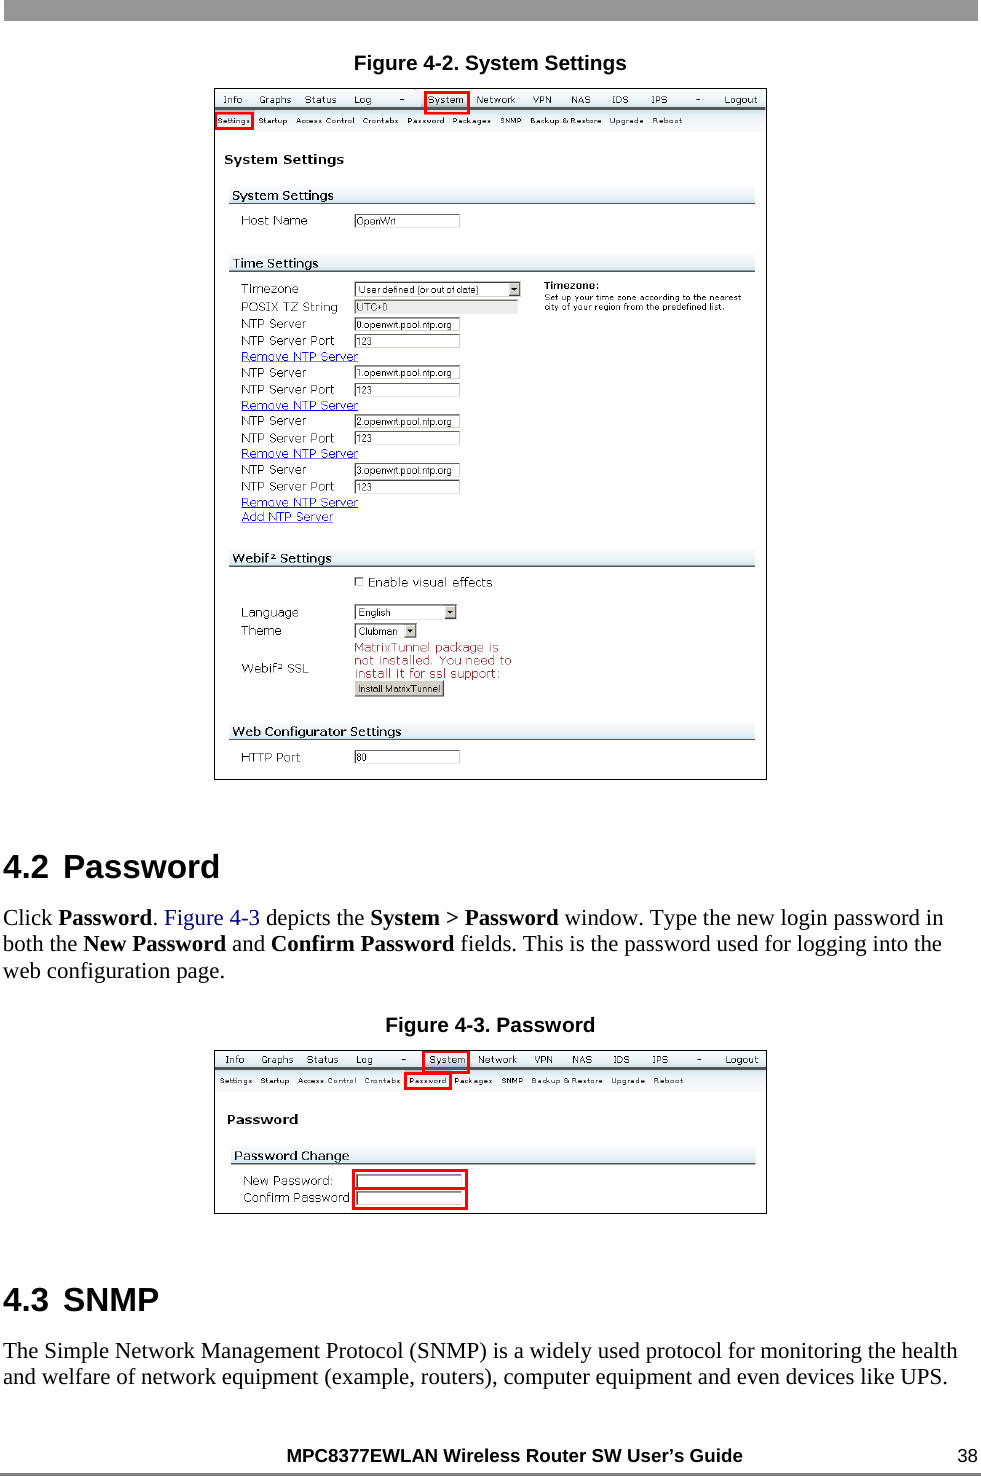                                                          MPC8377EWLAN Wireless Router SW User’s Guide    38 Figure 4-2. System Settings  4.2 Password Click Password. Figure 4-3 depicts the System &gt; Password window. Type the new login password in both the New Password and Confirm Password fields. This is the password used for logging into the web configuration page. Figure 4-3. Password  4.3 SNMP The Simple Network Management Protocol (SNMP) is a widely used protocol for monitoring the health and welfare of network equipment (example, routers), computer equipment and even devices like UPS. 